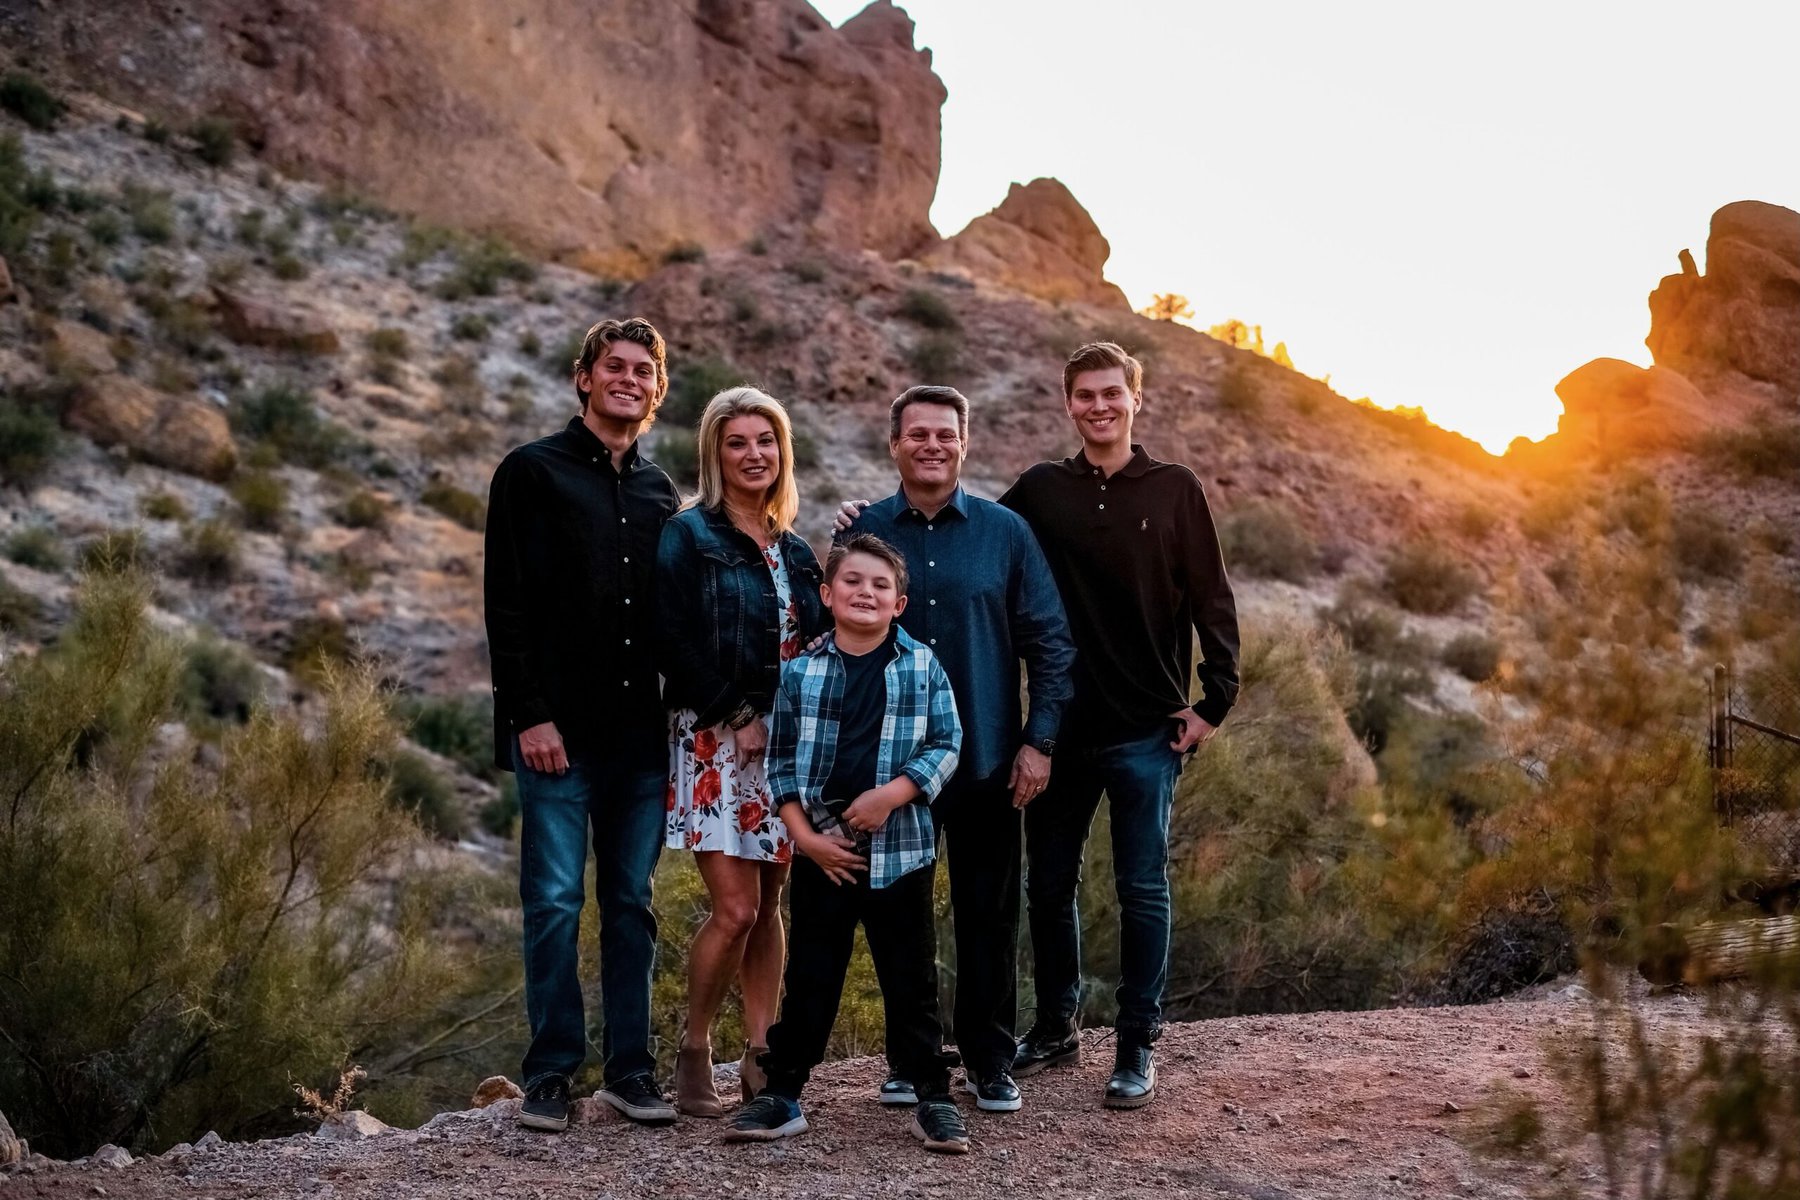 The Garcia family poses in front of a rocky landscape in Arizona.